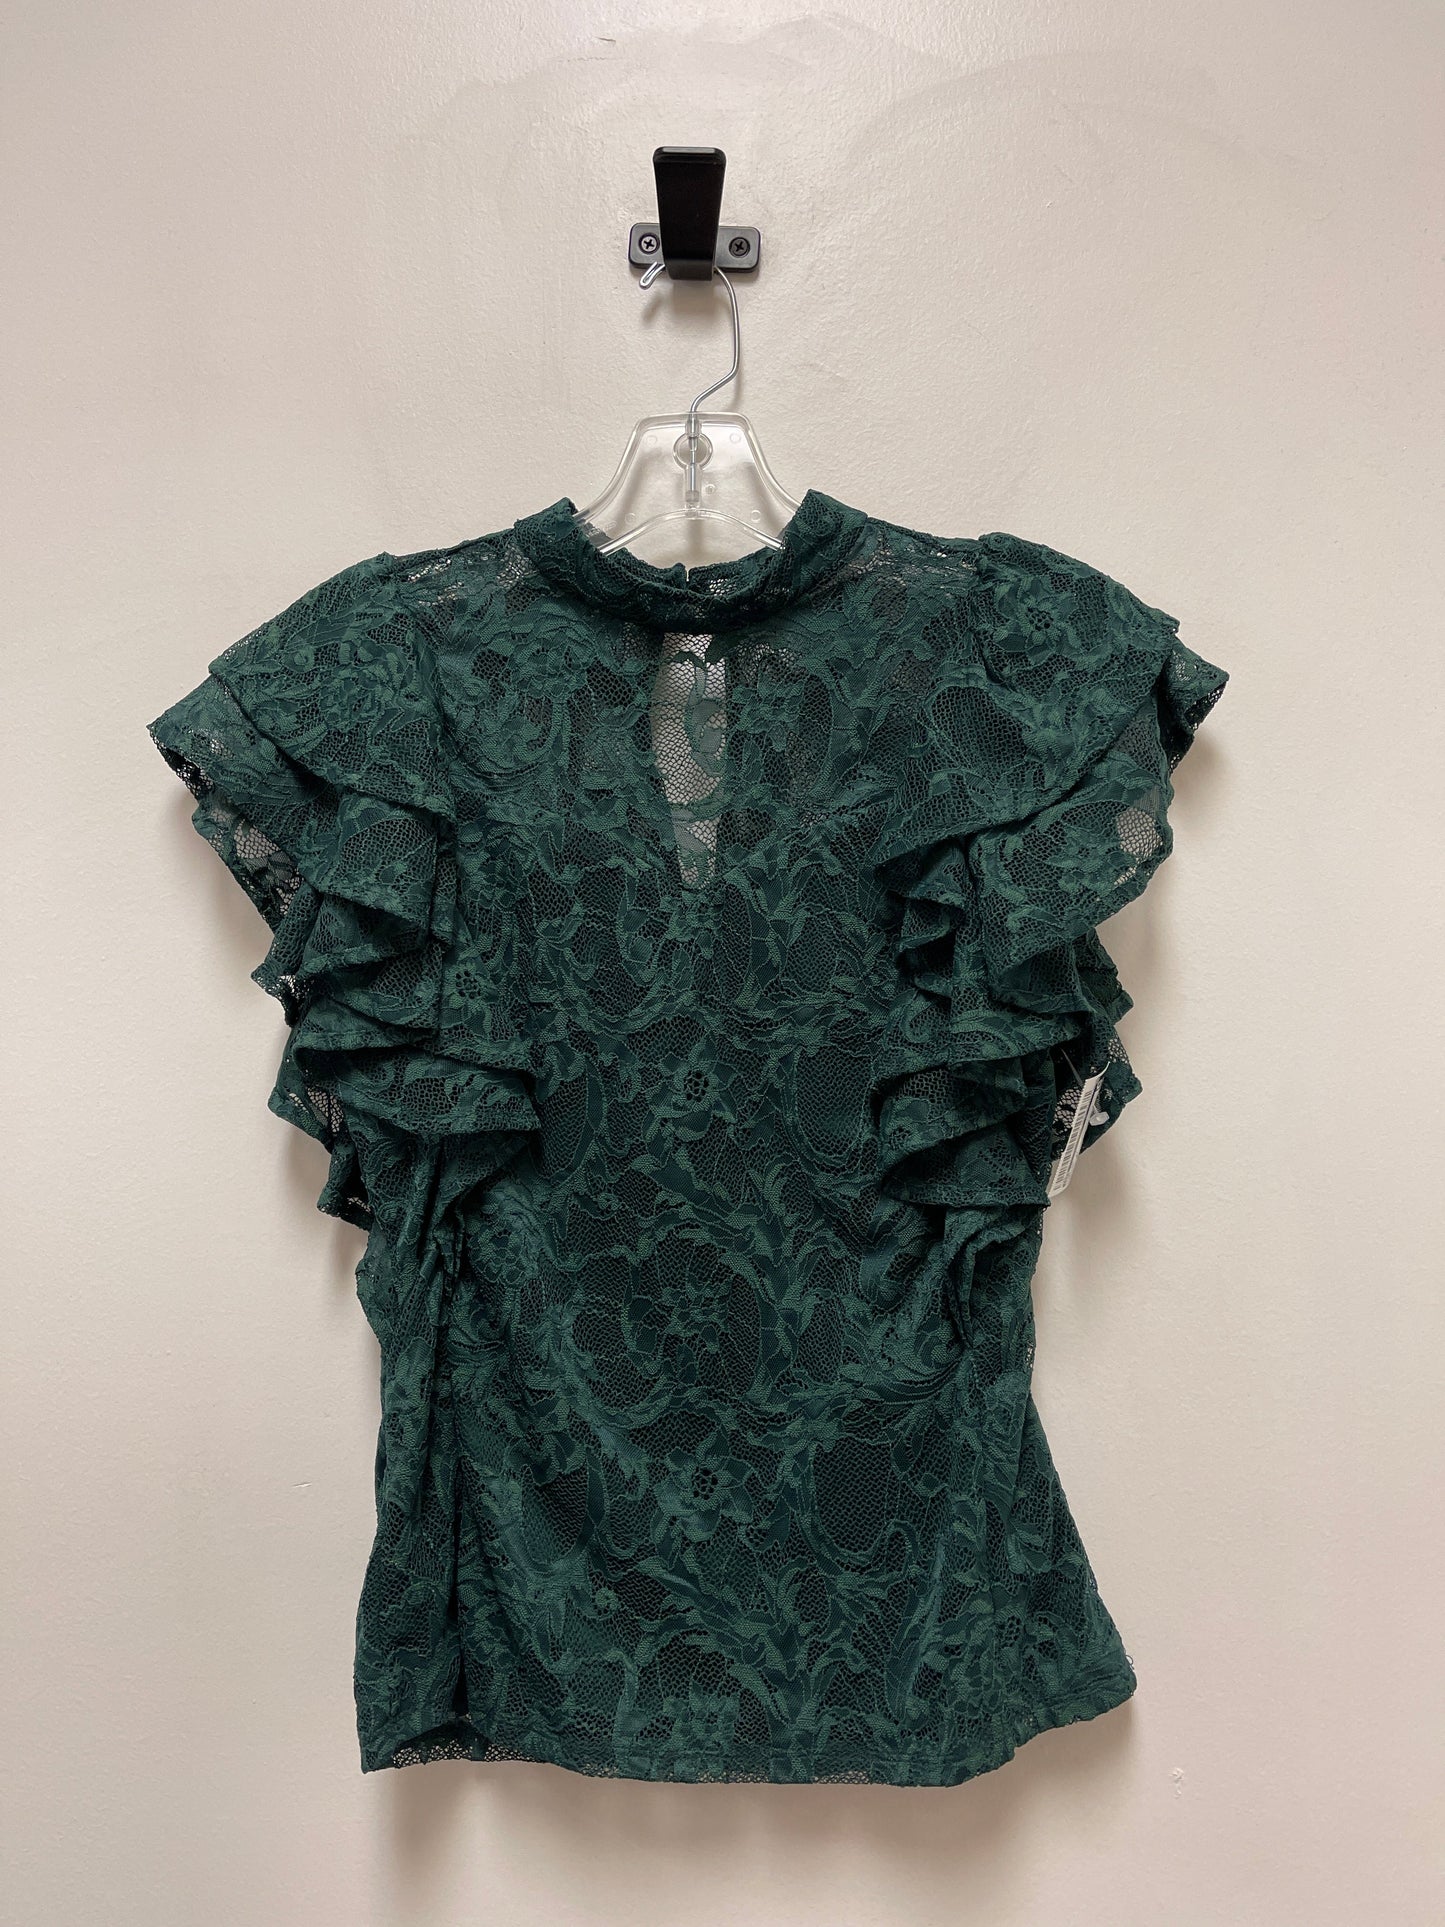 Green Top Short Sleeve Bke, Size S